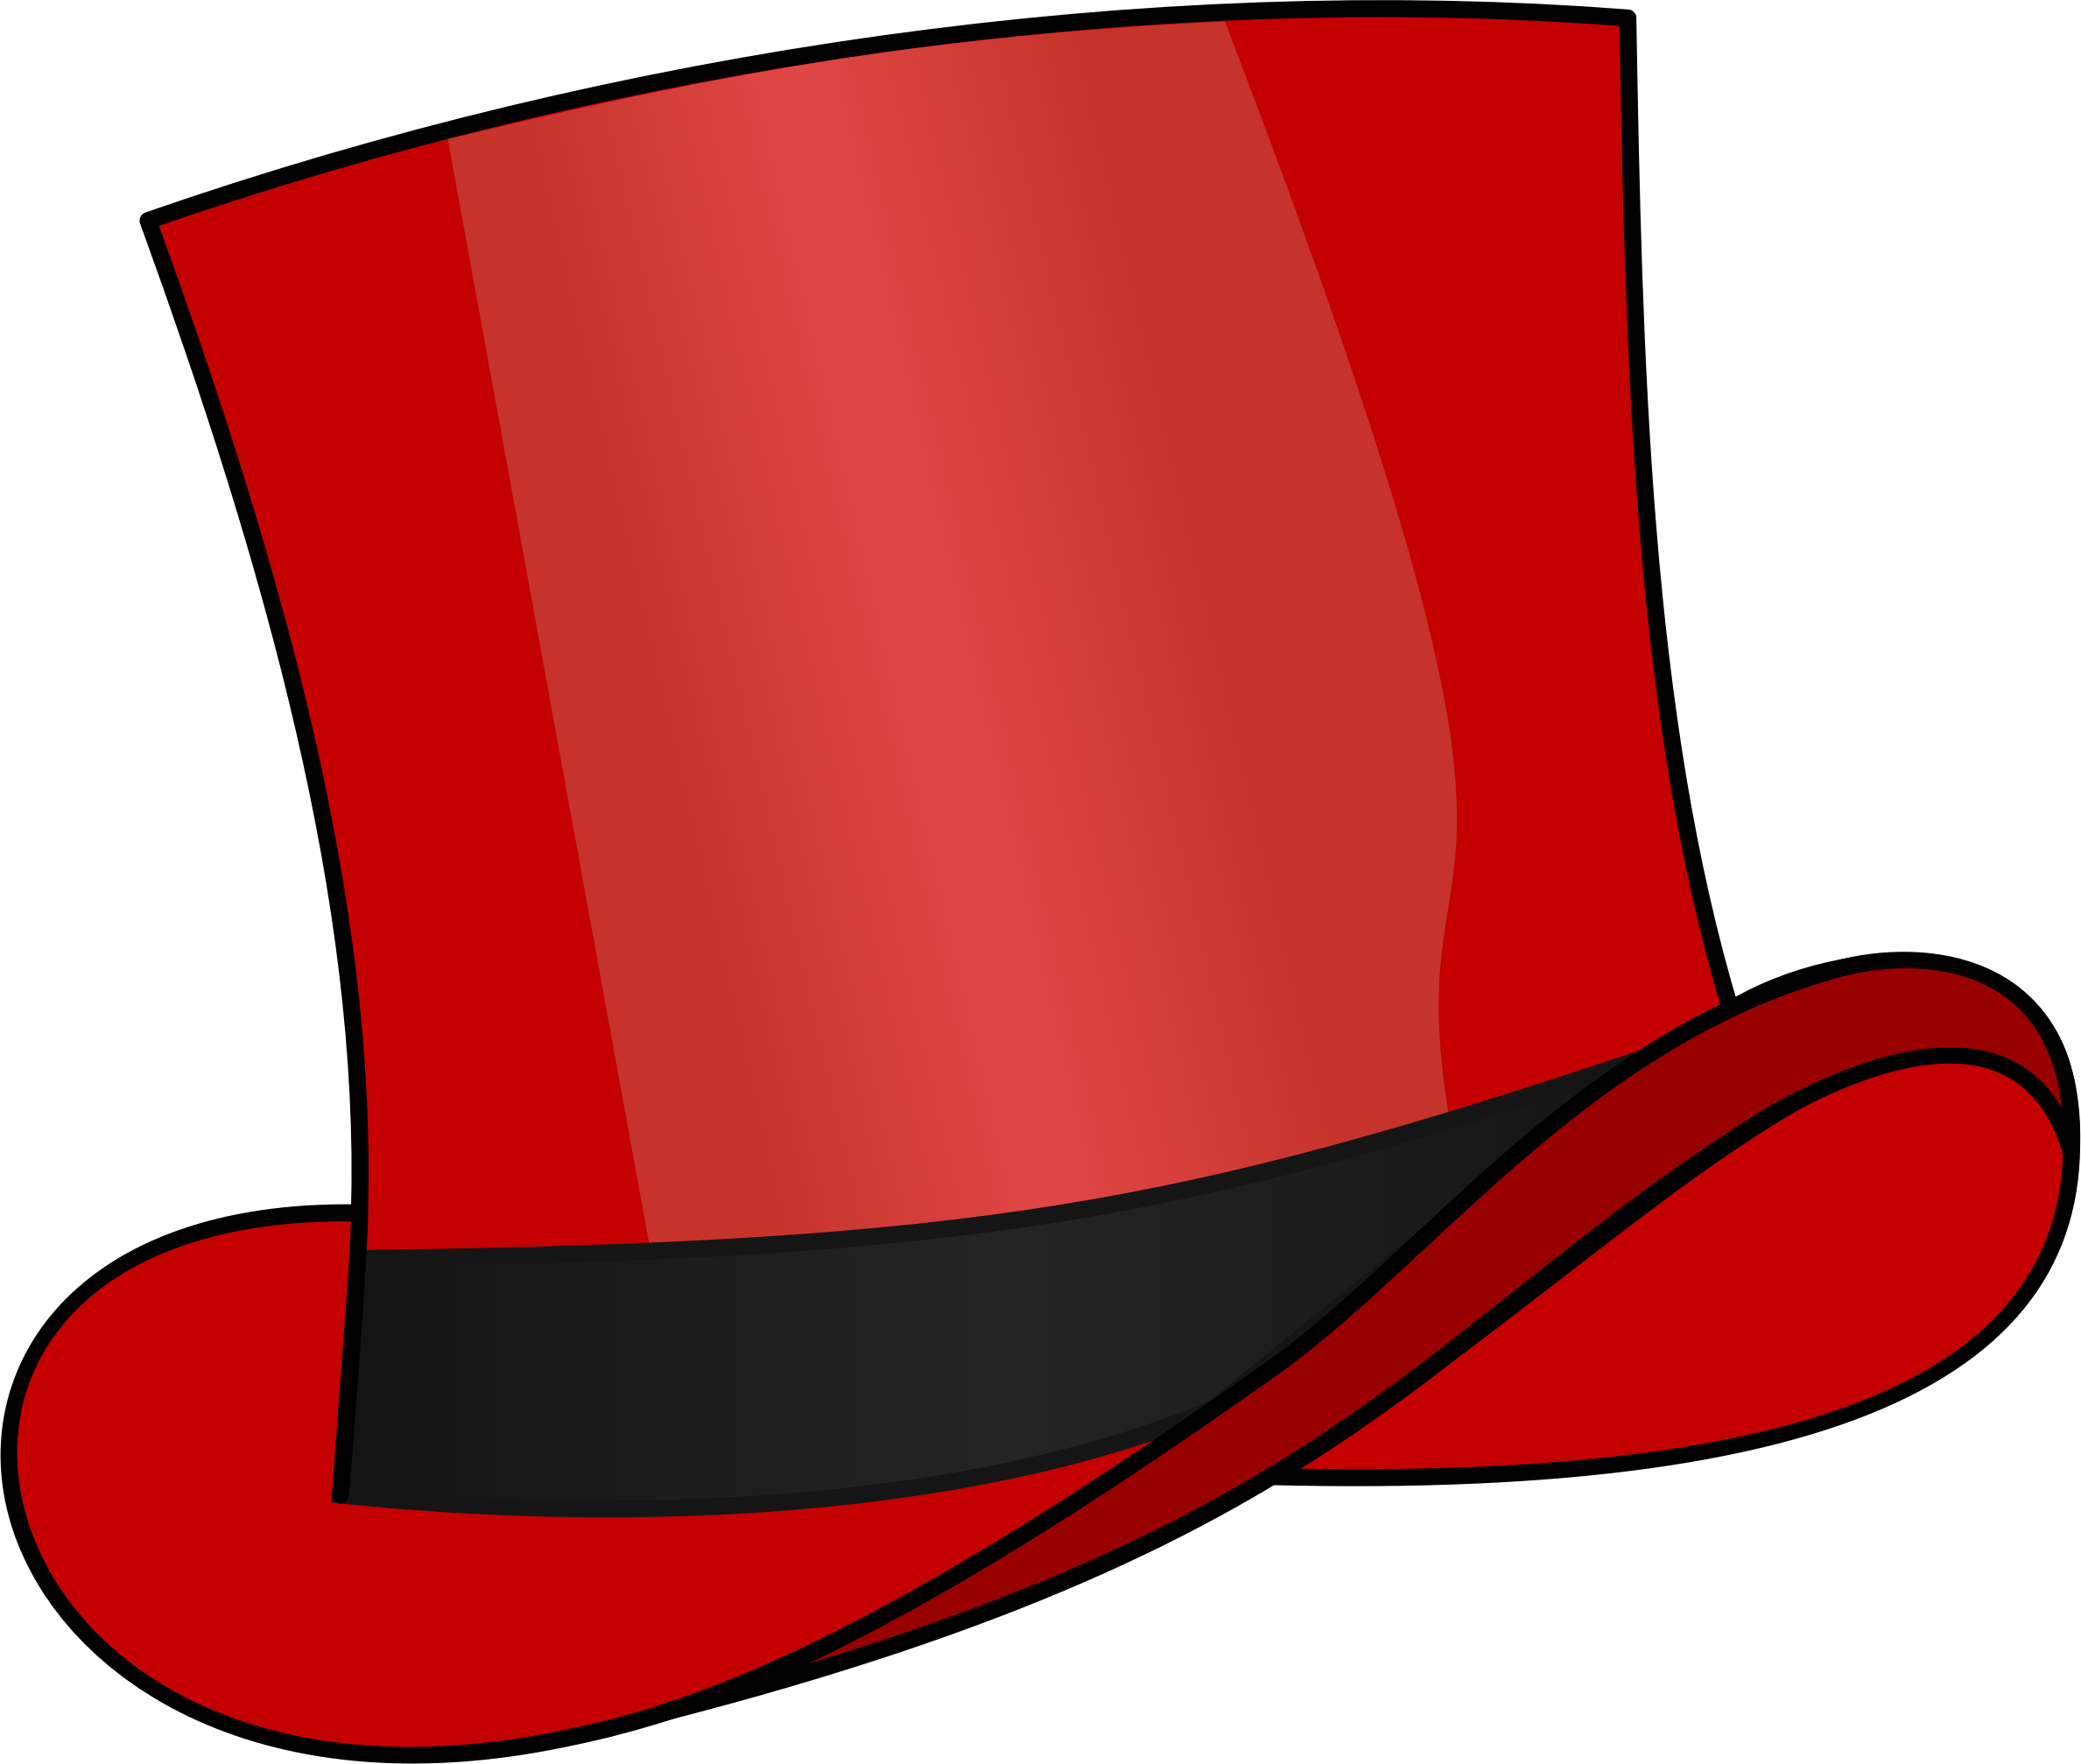 Related Red Top Hat Clipart - Red Hat De Bono (2377x2015)